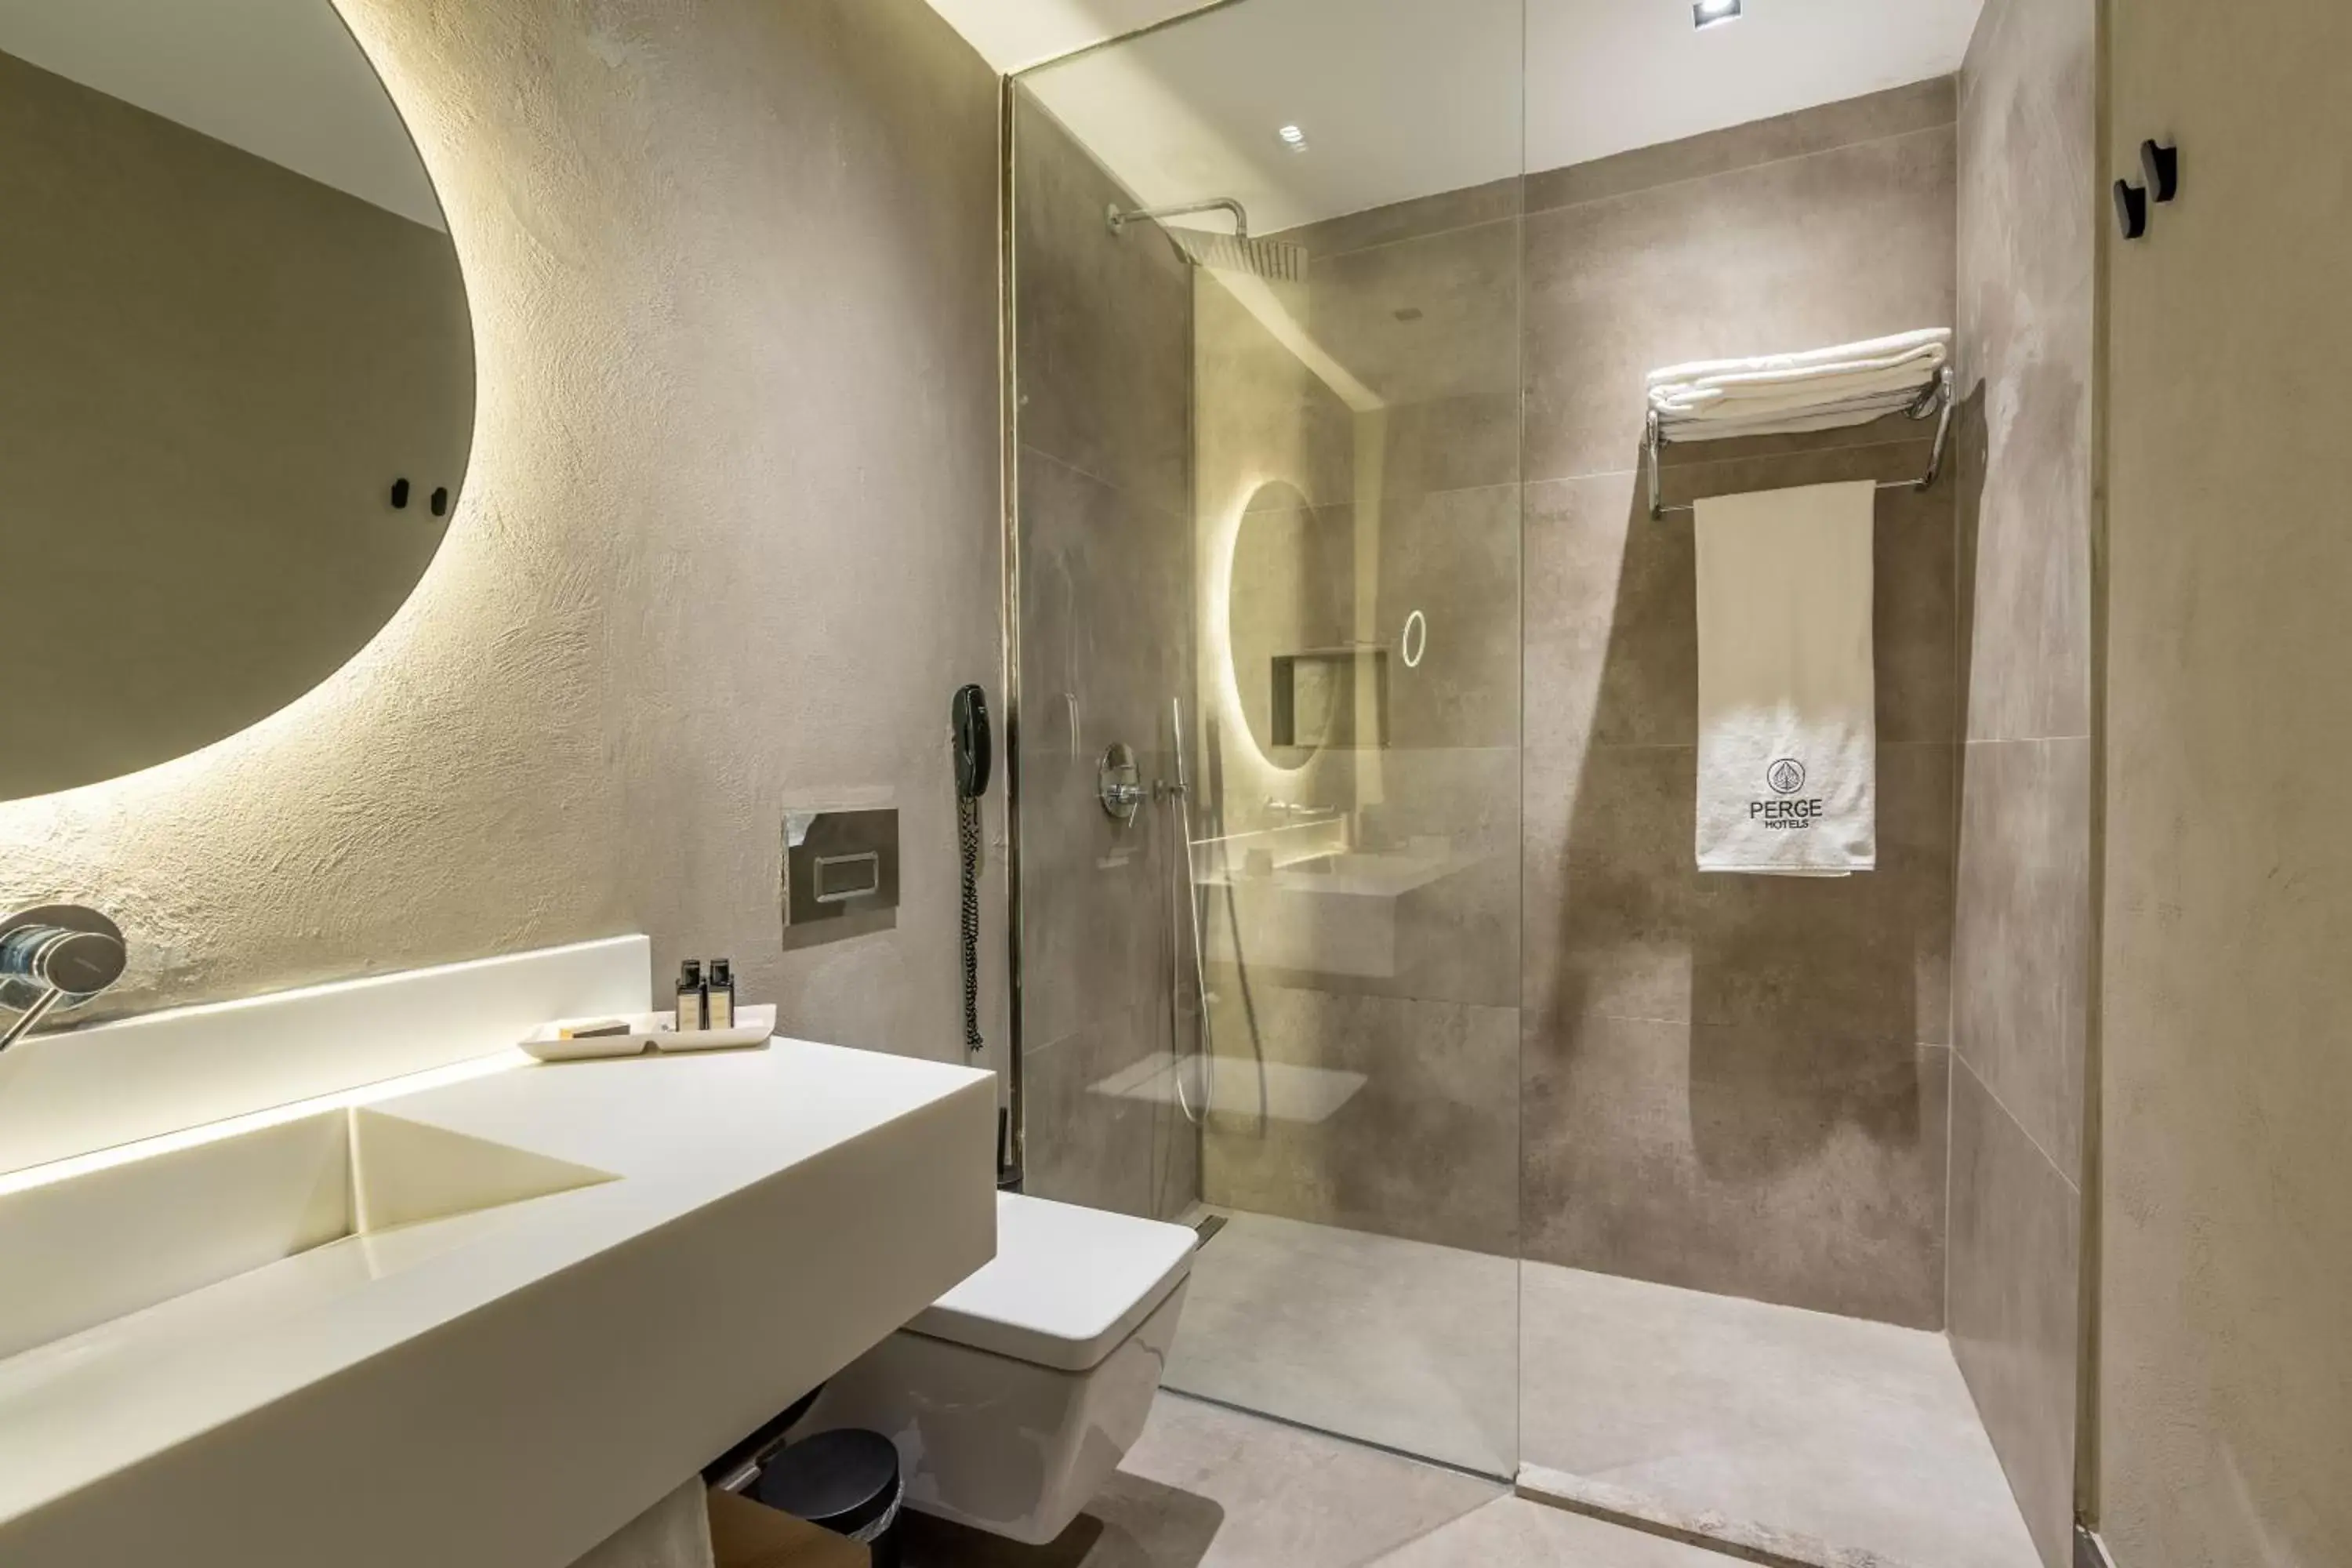 Shower, Bathroom in Perge Hotels - Adult Only 18 plus